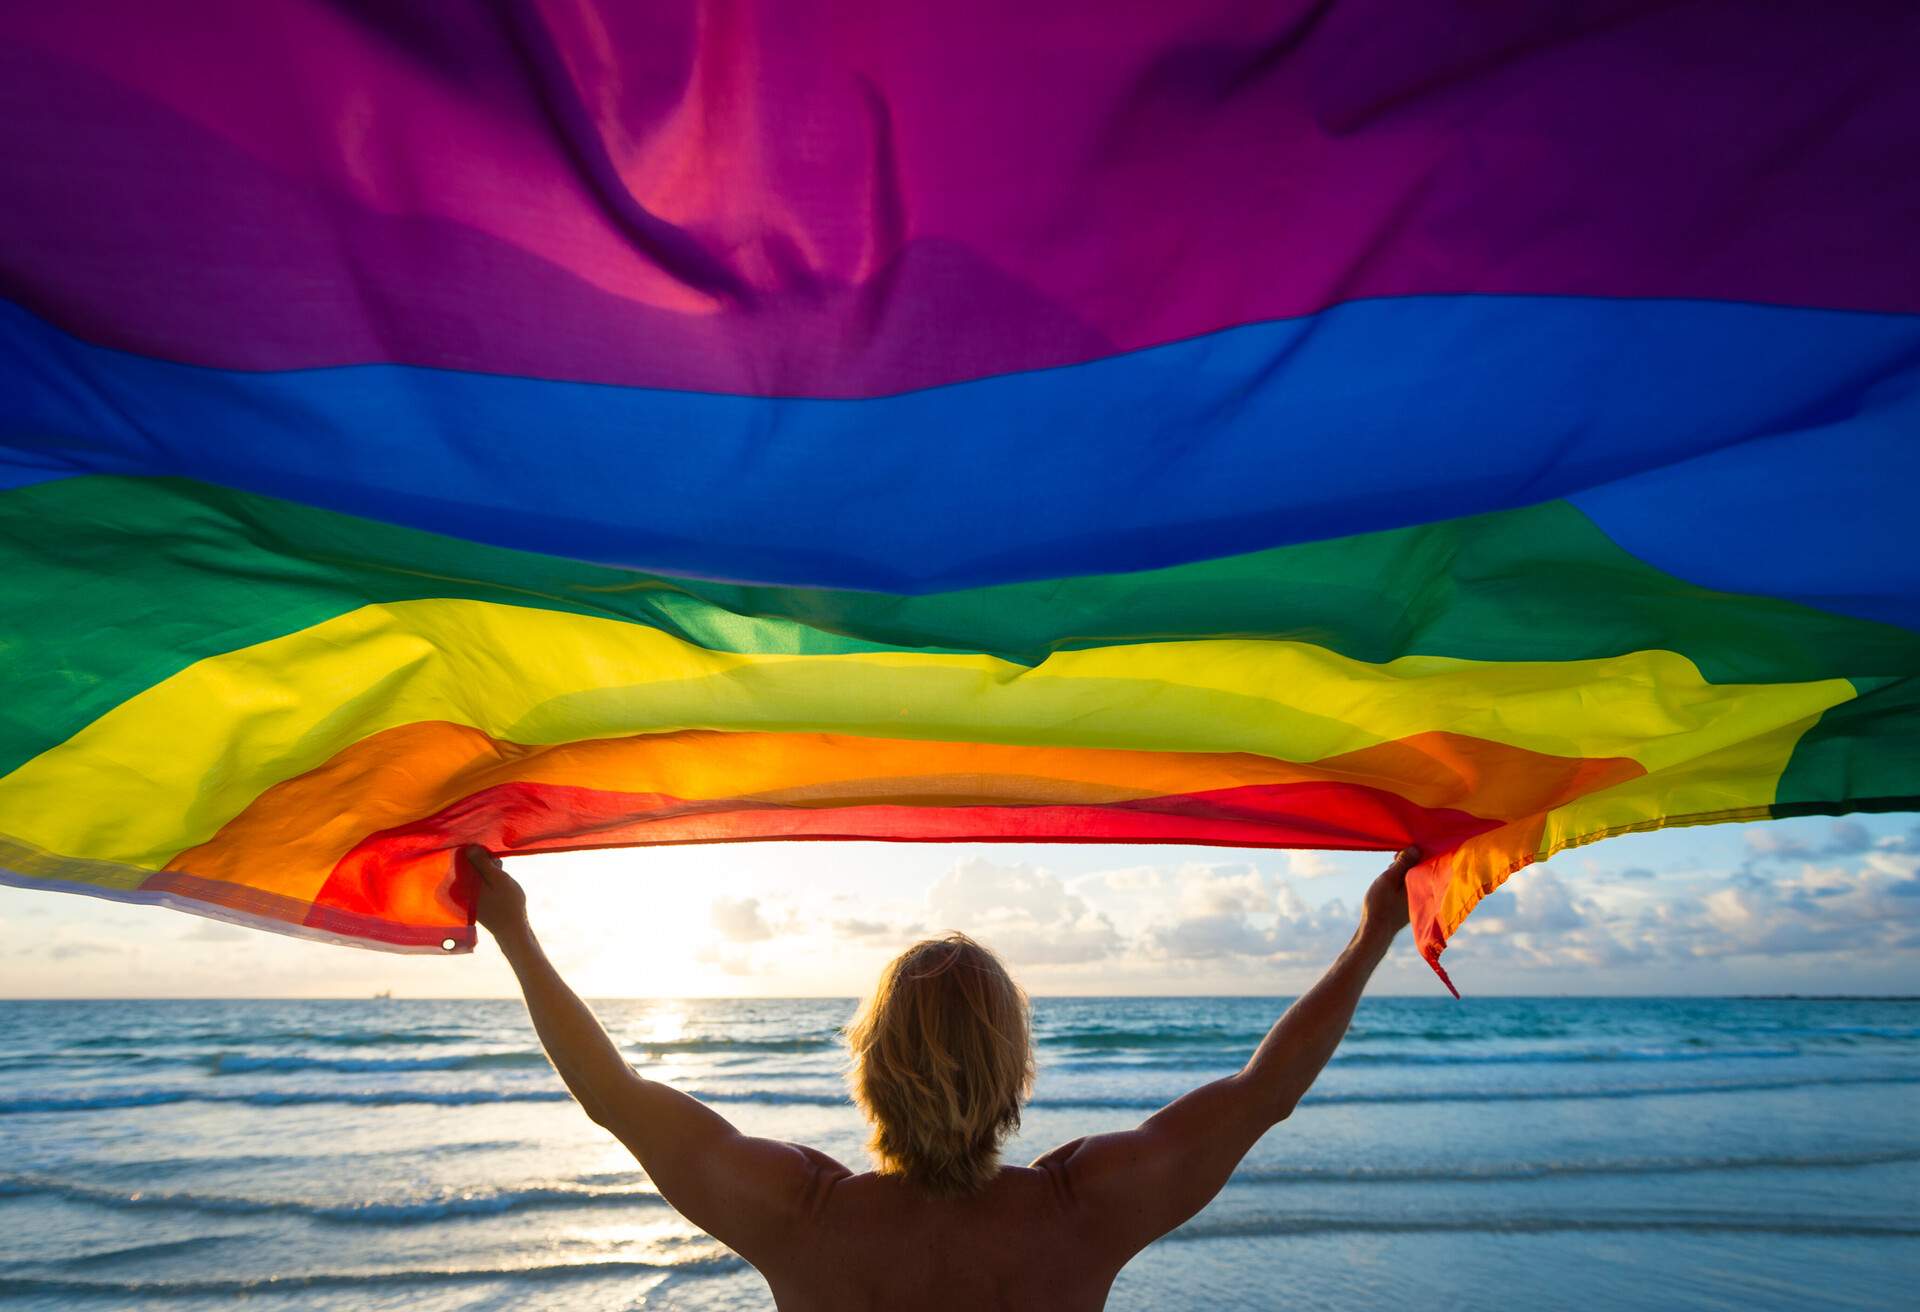 Silhouette of a blonde person raising a rainbow flag blown by the wind in front of a beach.